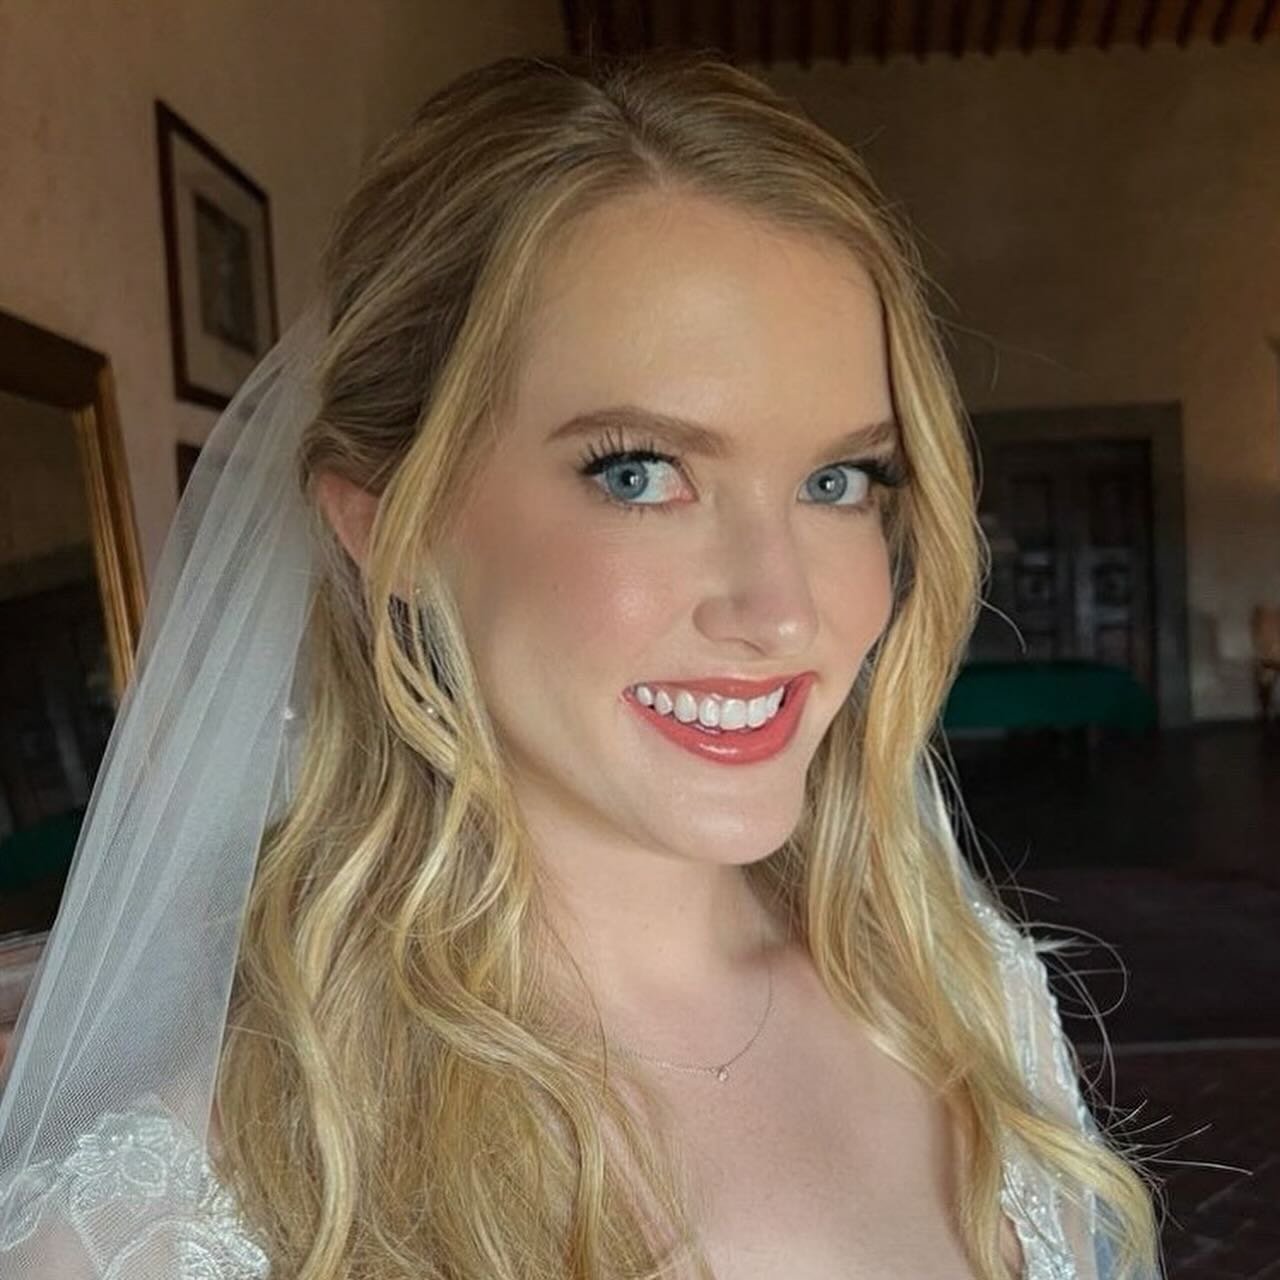 I had the immense pleasure of crafting Kirsten's bridal hair and makeup look, and it was an absolute joy to be part of her special journey. 👑✨ Her natural beauty radiated, and I couldn't be happier to have played a role in enhancing her glow on this